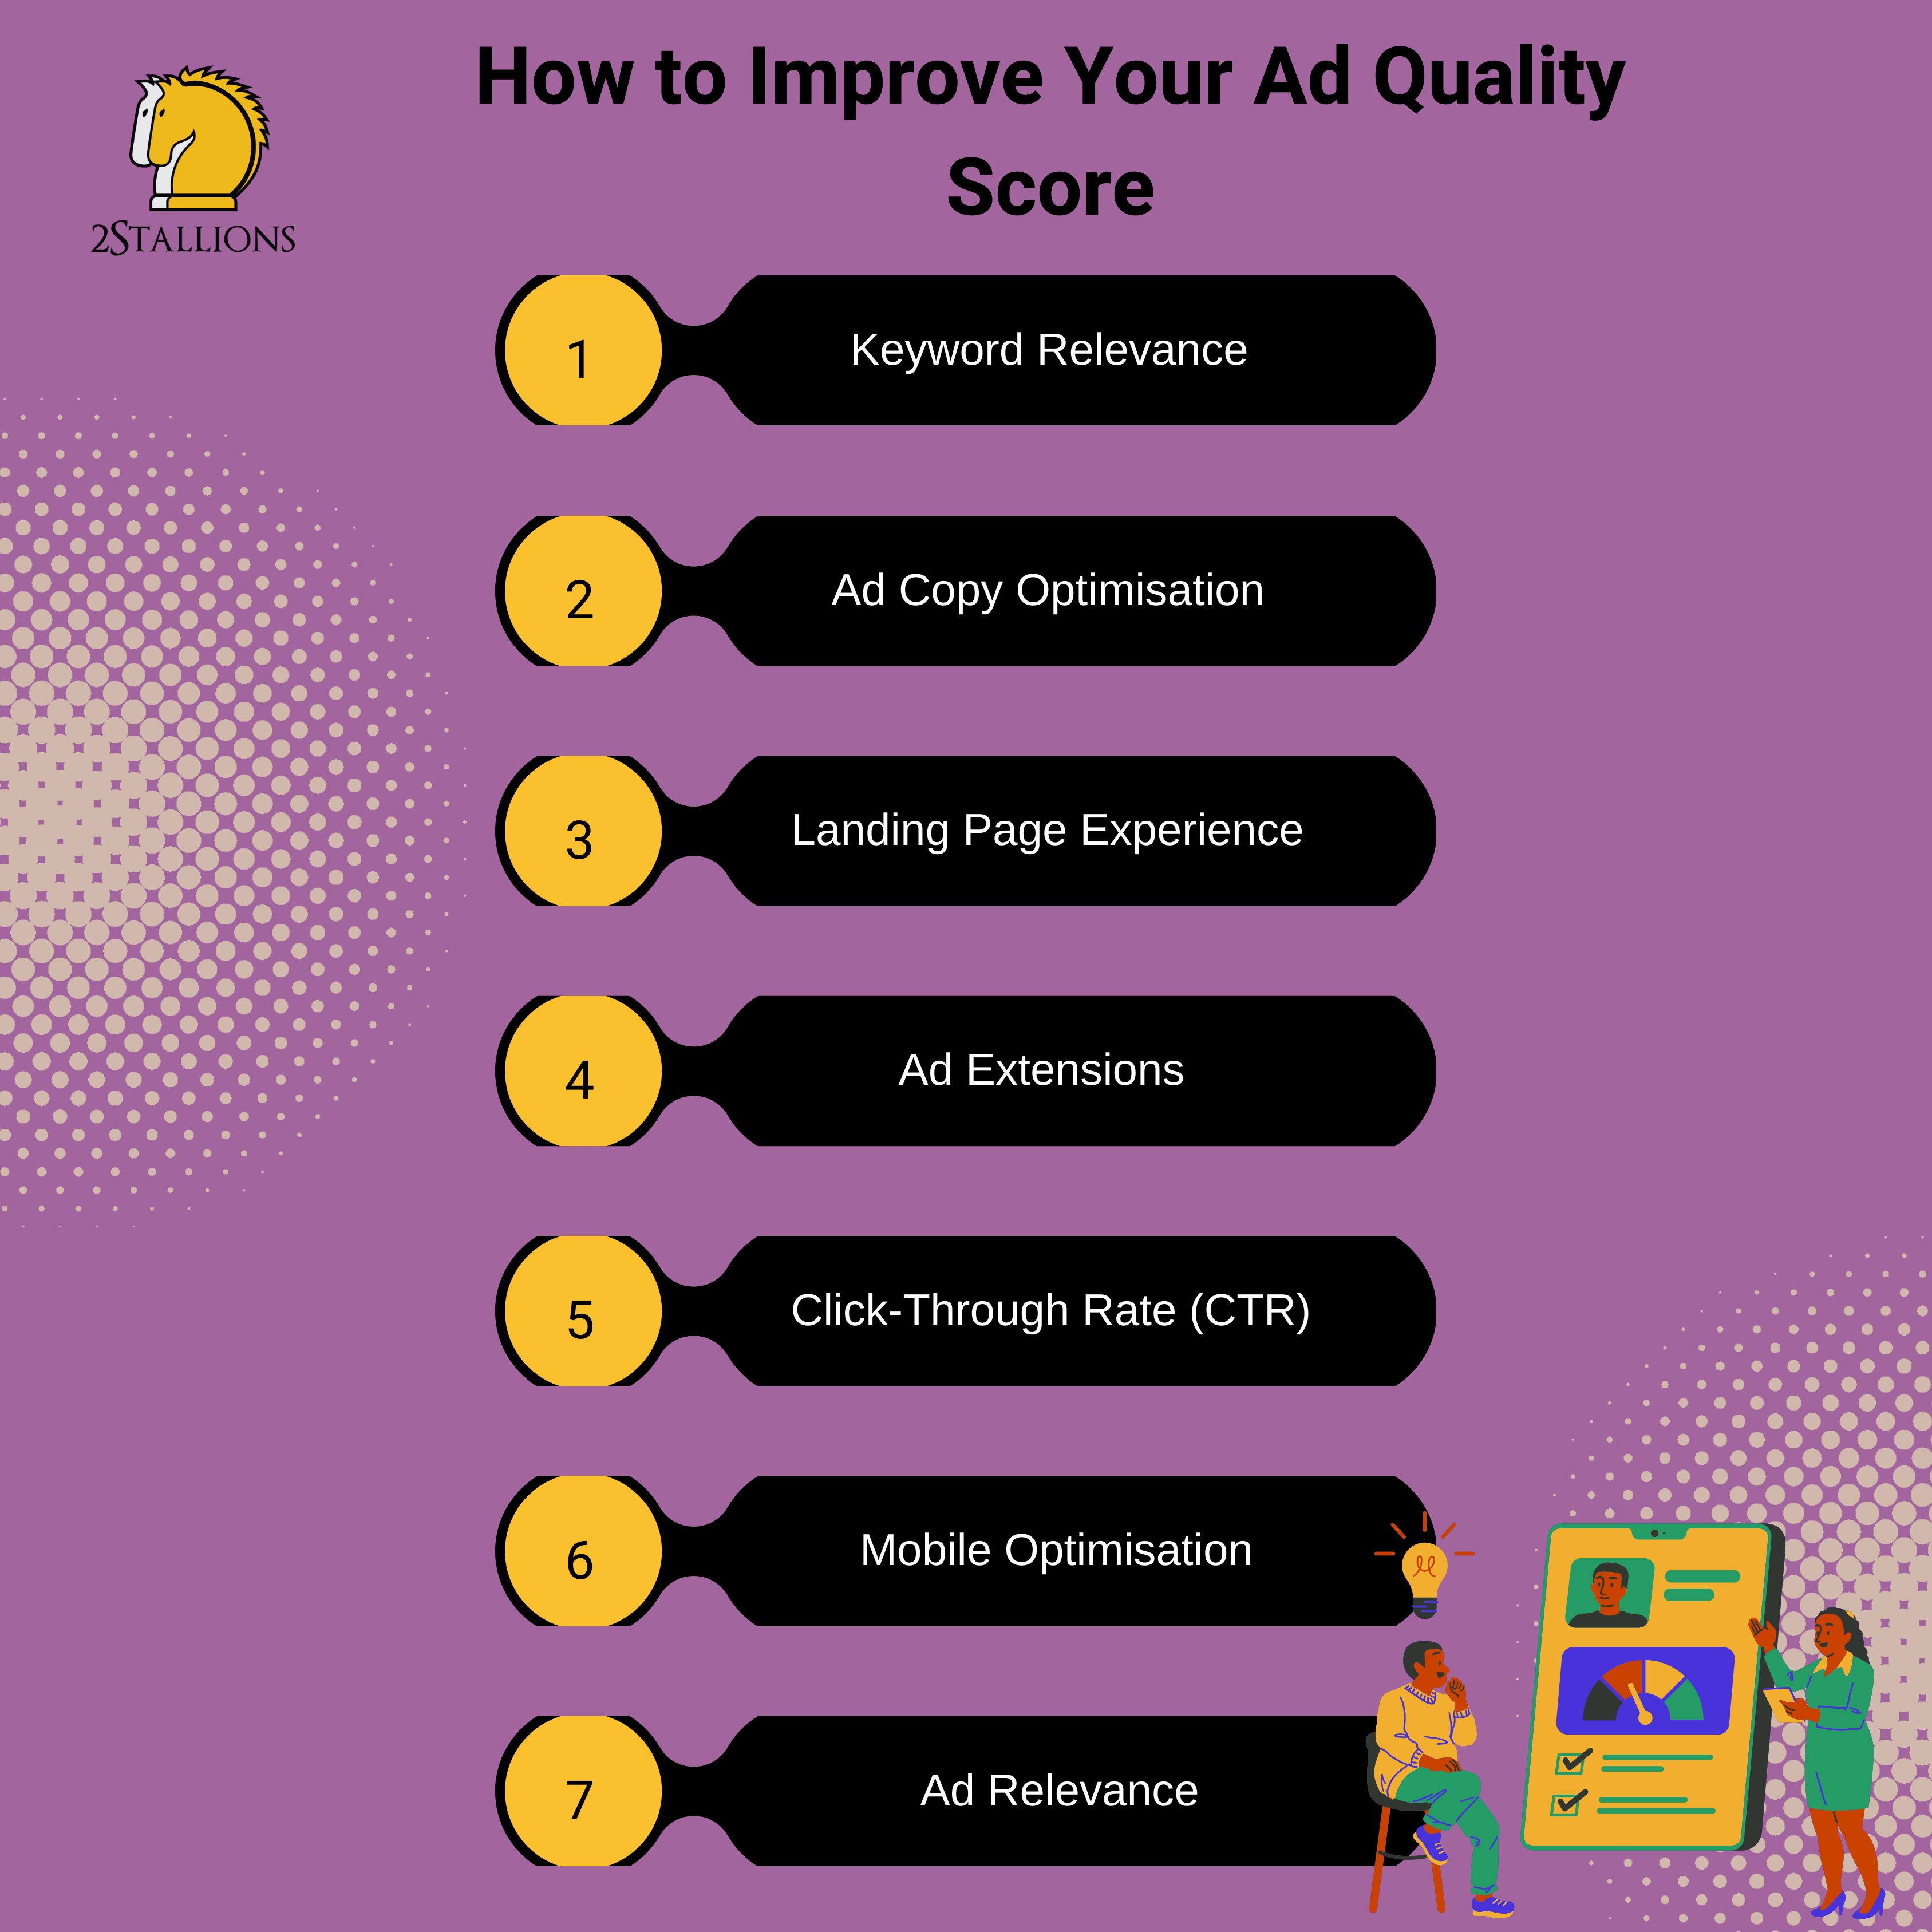 How to Improve Your Ad Quality Score | 2Stallions